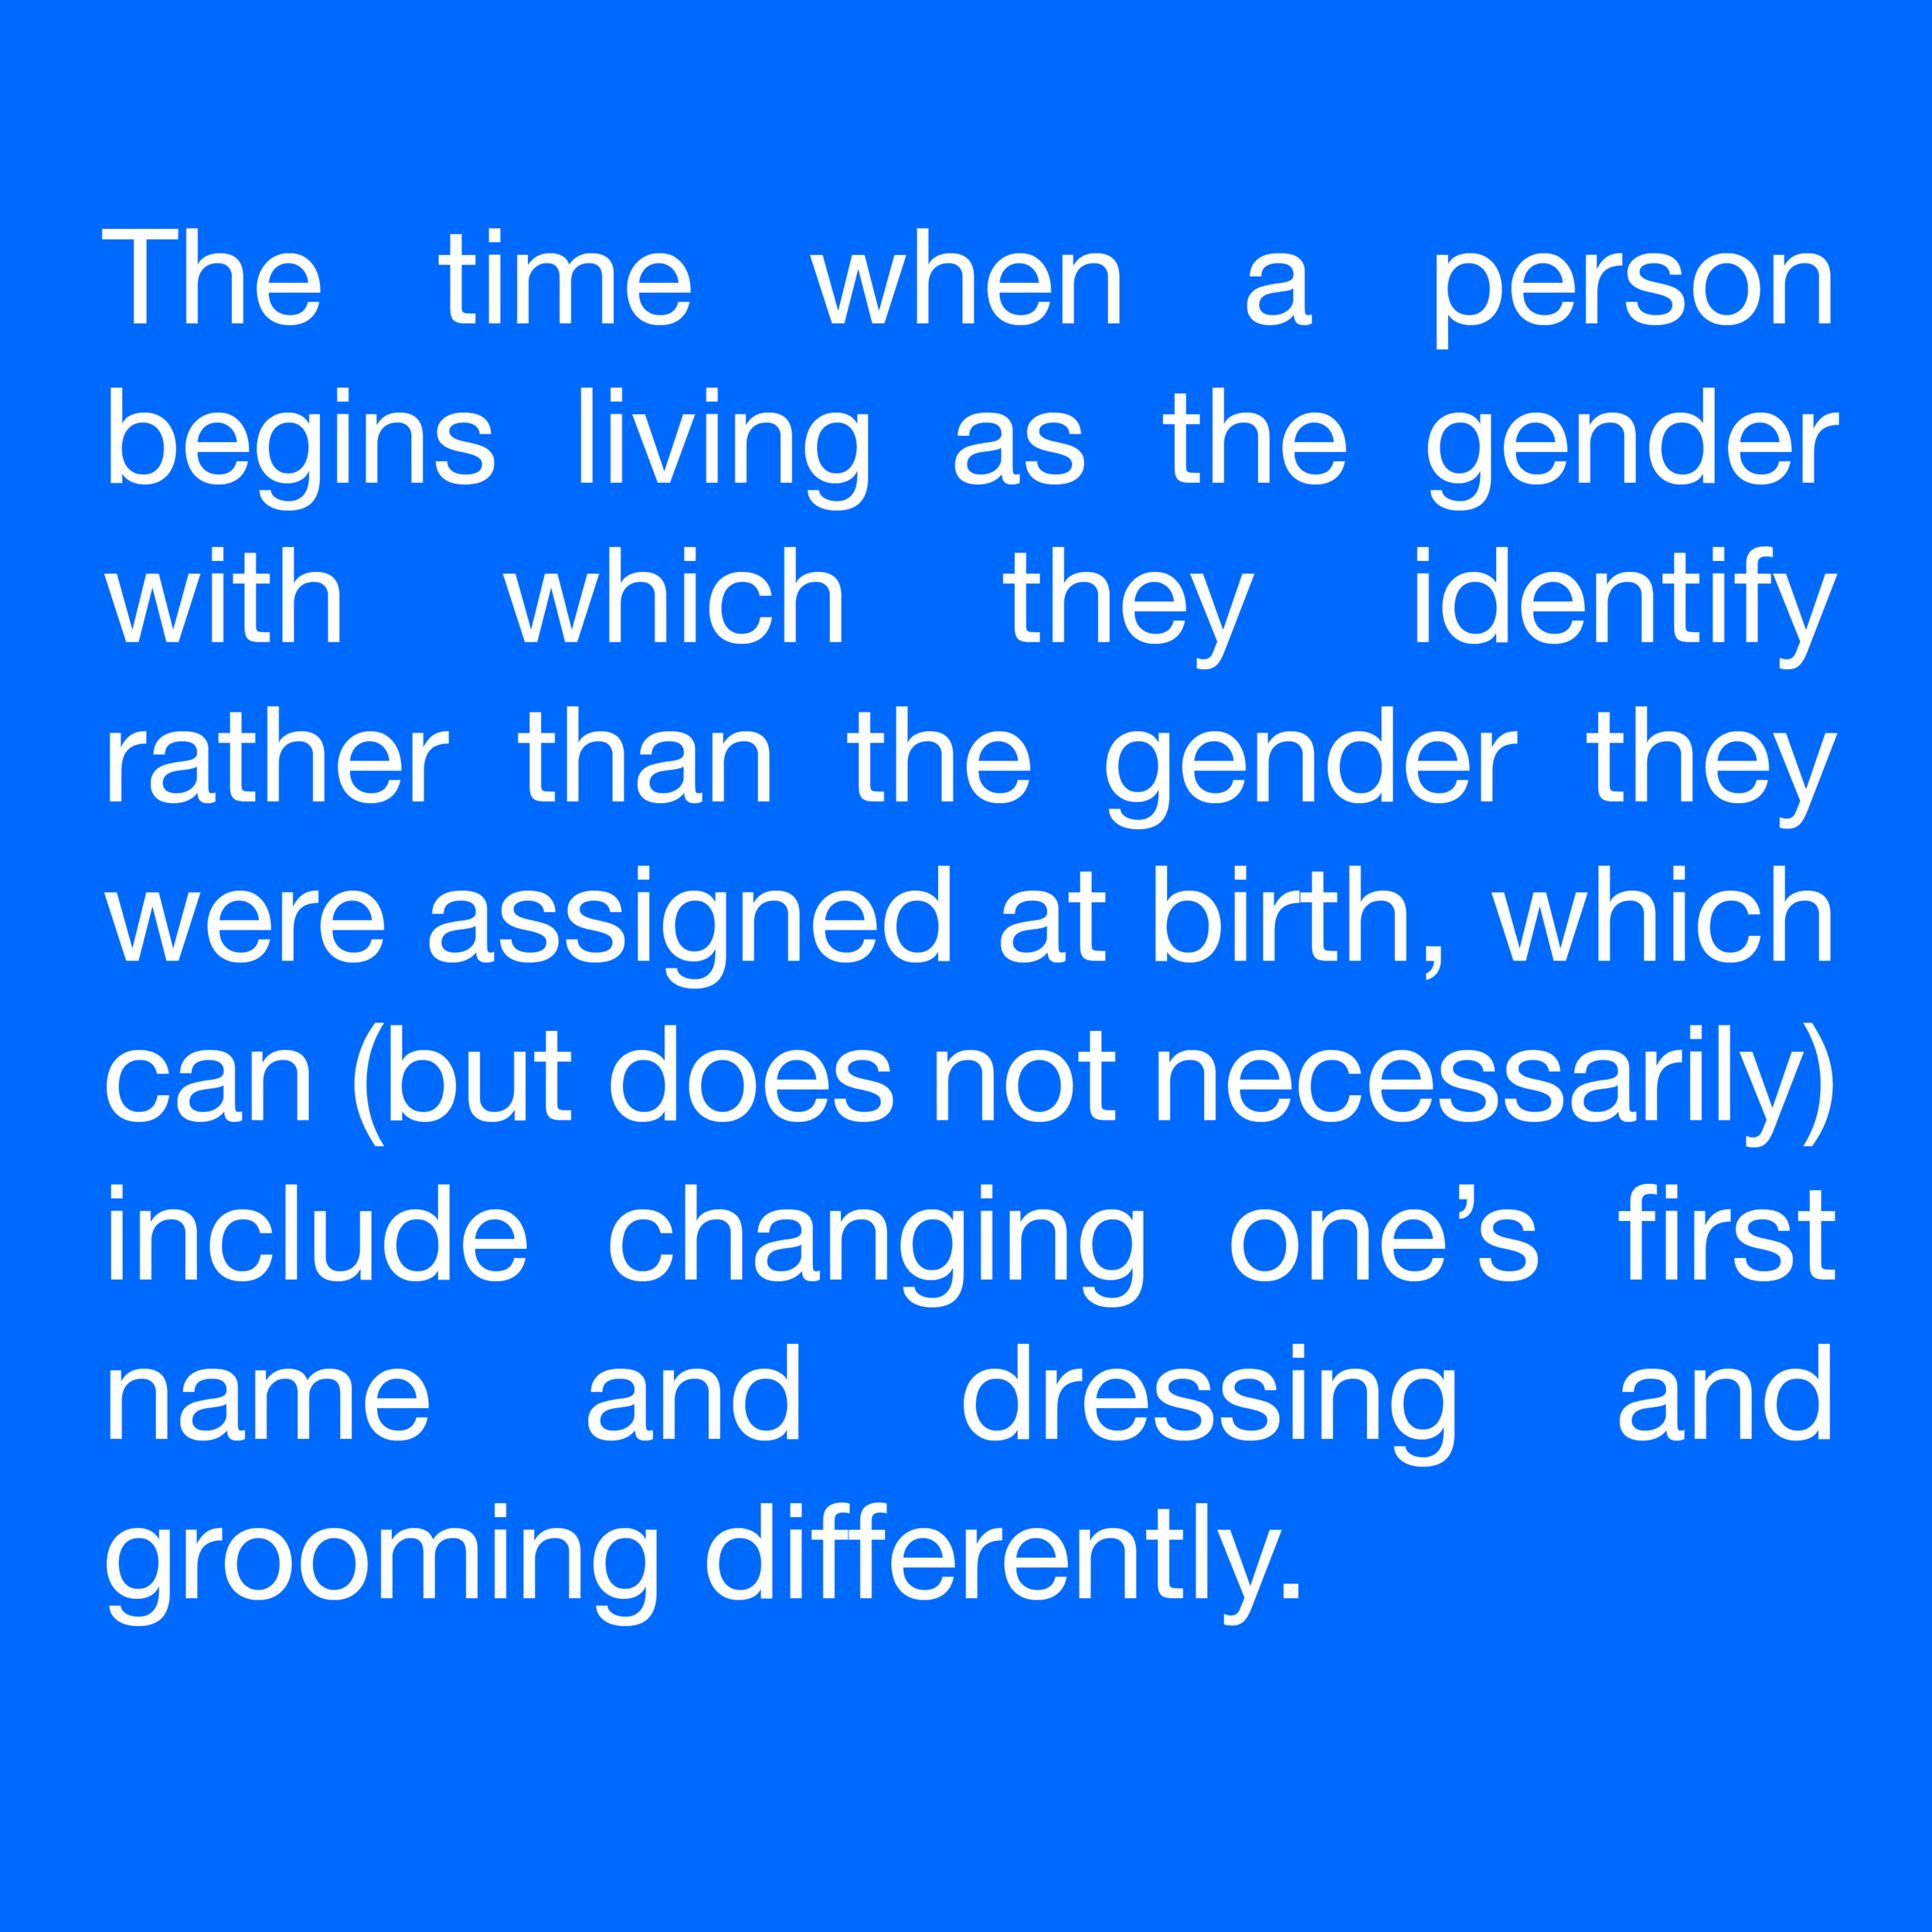  The time when a person begins living as the gender with which they identify rather than the gender they were assigned at birth, which can (but does not necessarily) include changing one’s first name and dressing and grooming differently. 